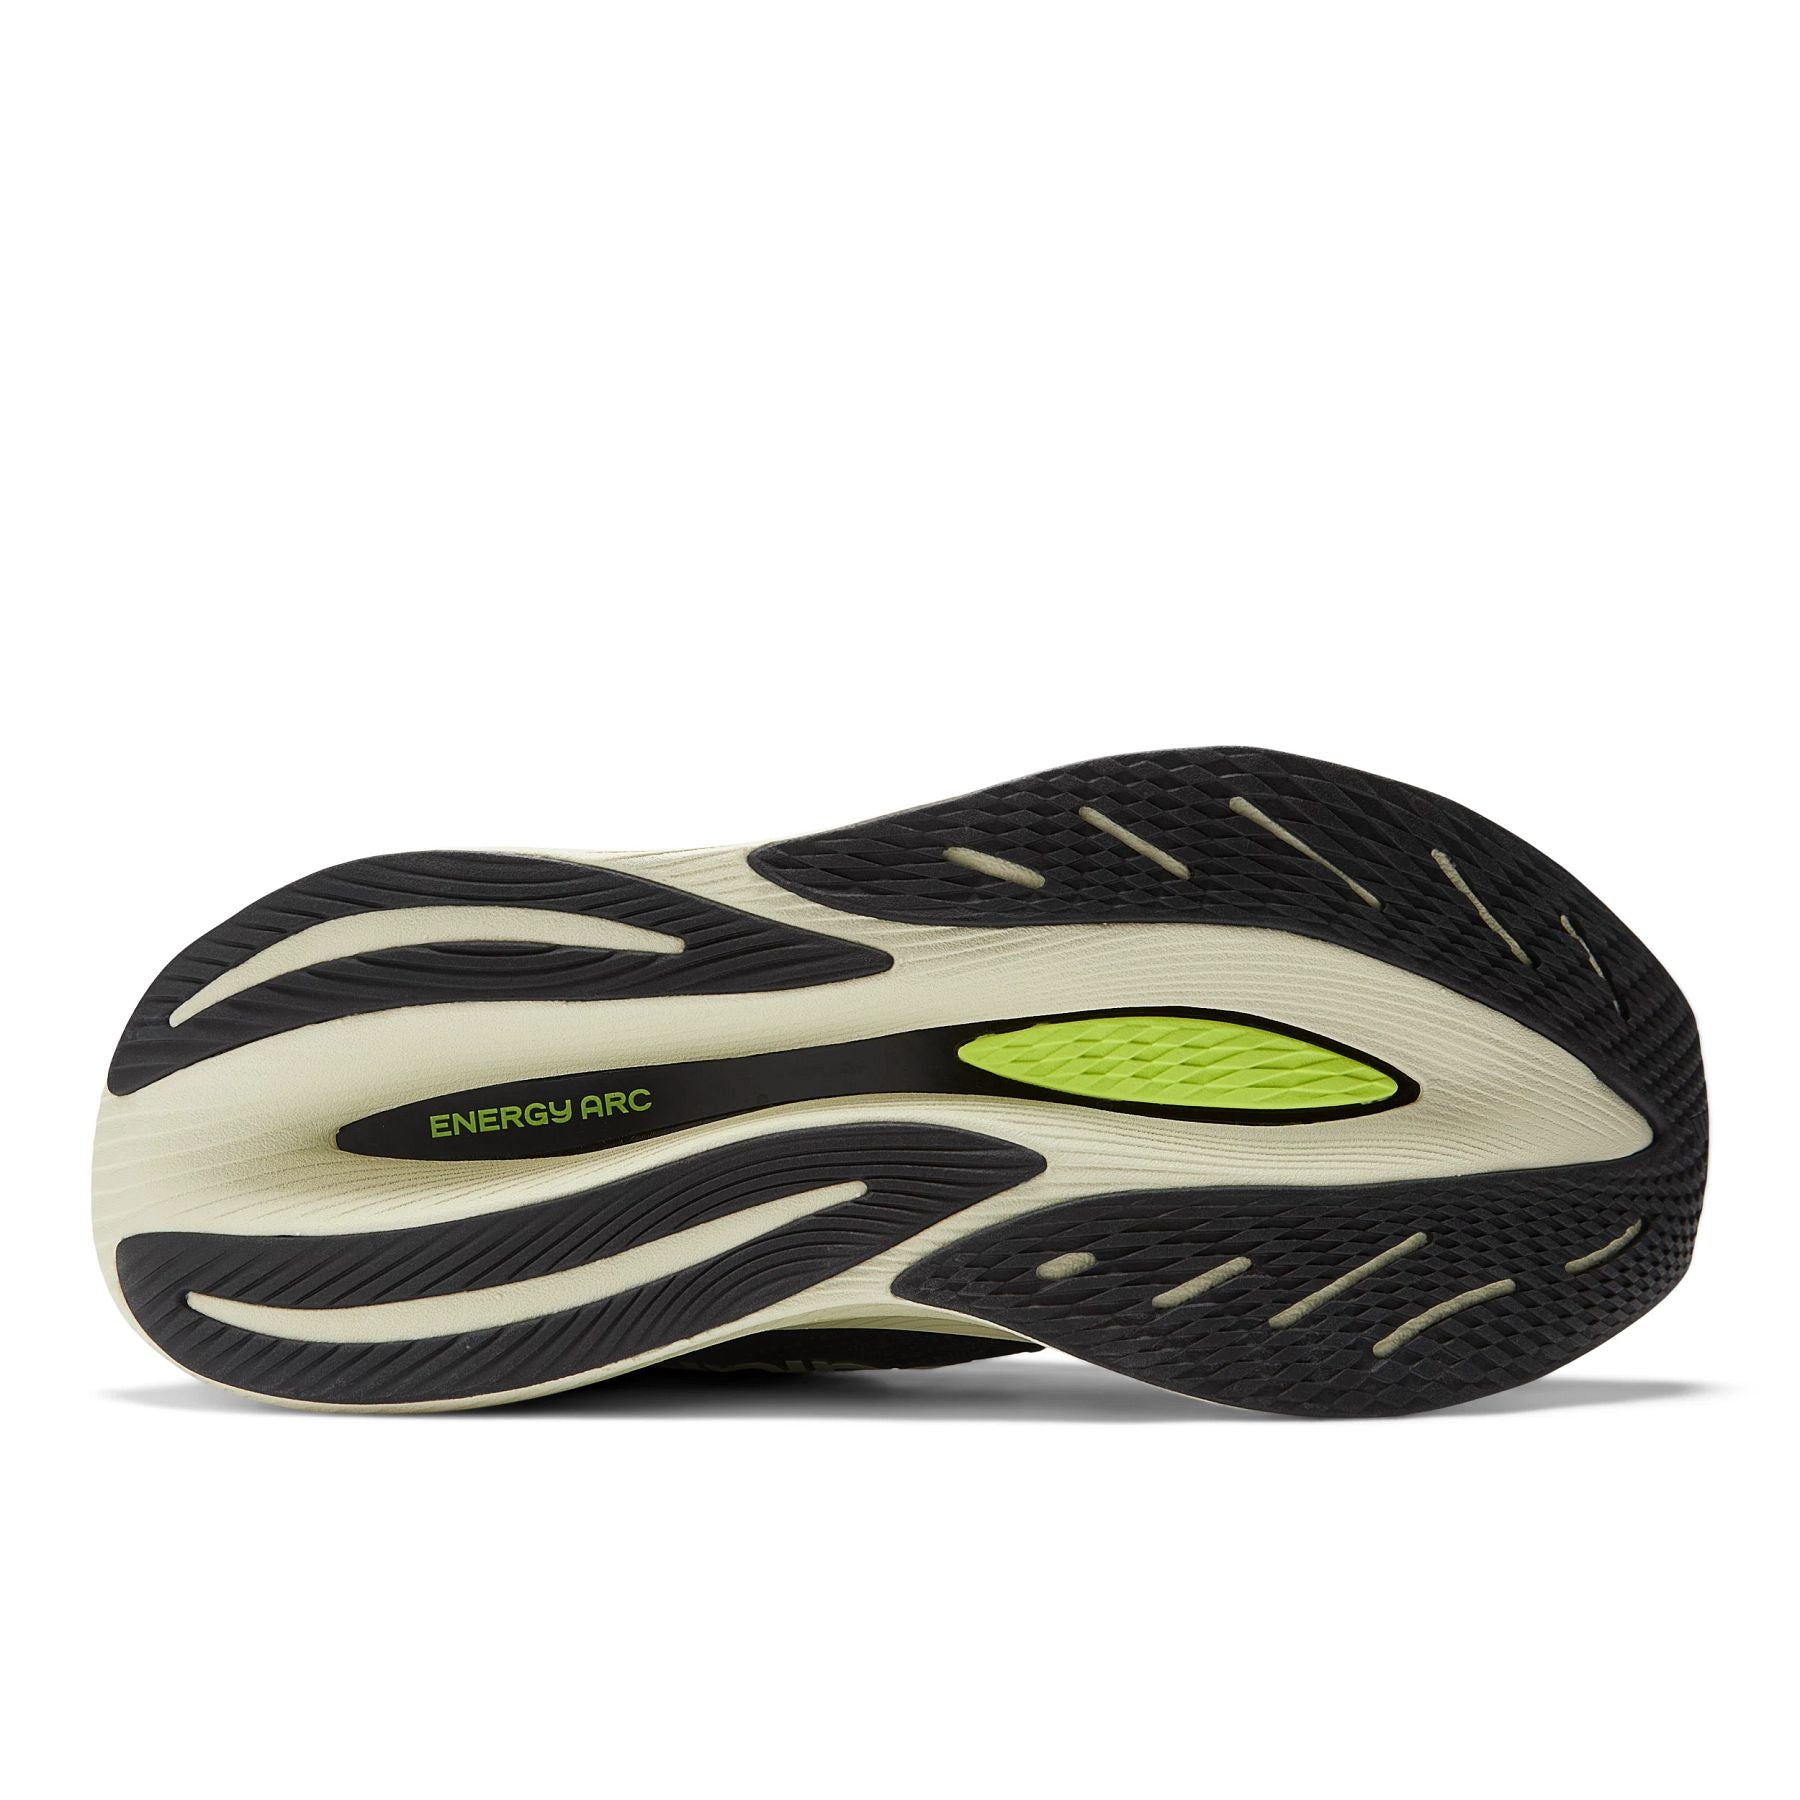 Bottom (outer sole) view of the Men's Fuel Cell SuperComp Trainer V2 in the color Black